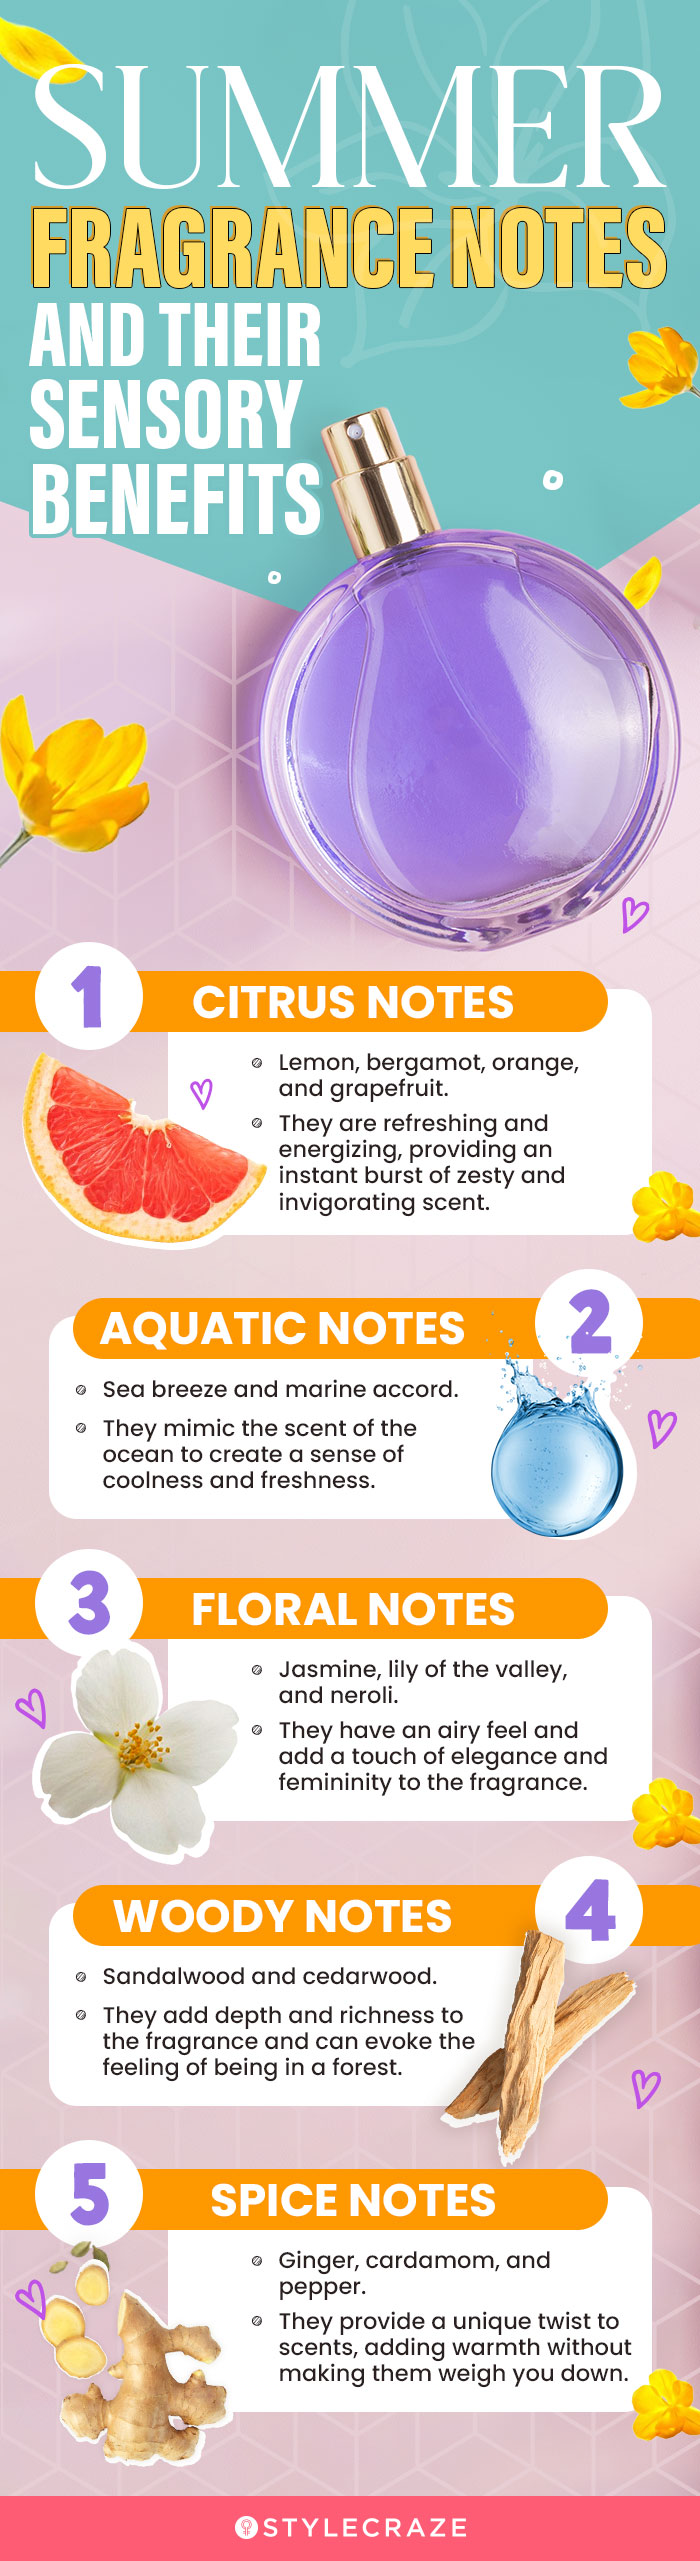 Summer Fragrance Notes And Their Sensory Benefits (infographic)